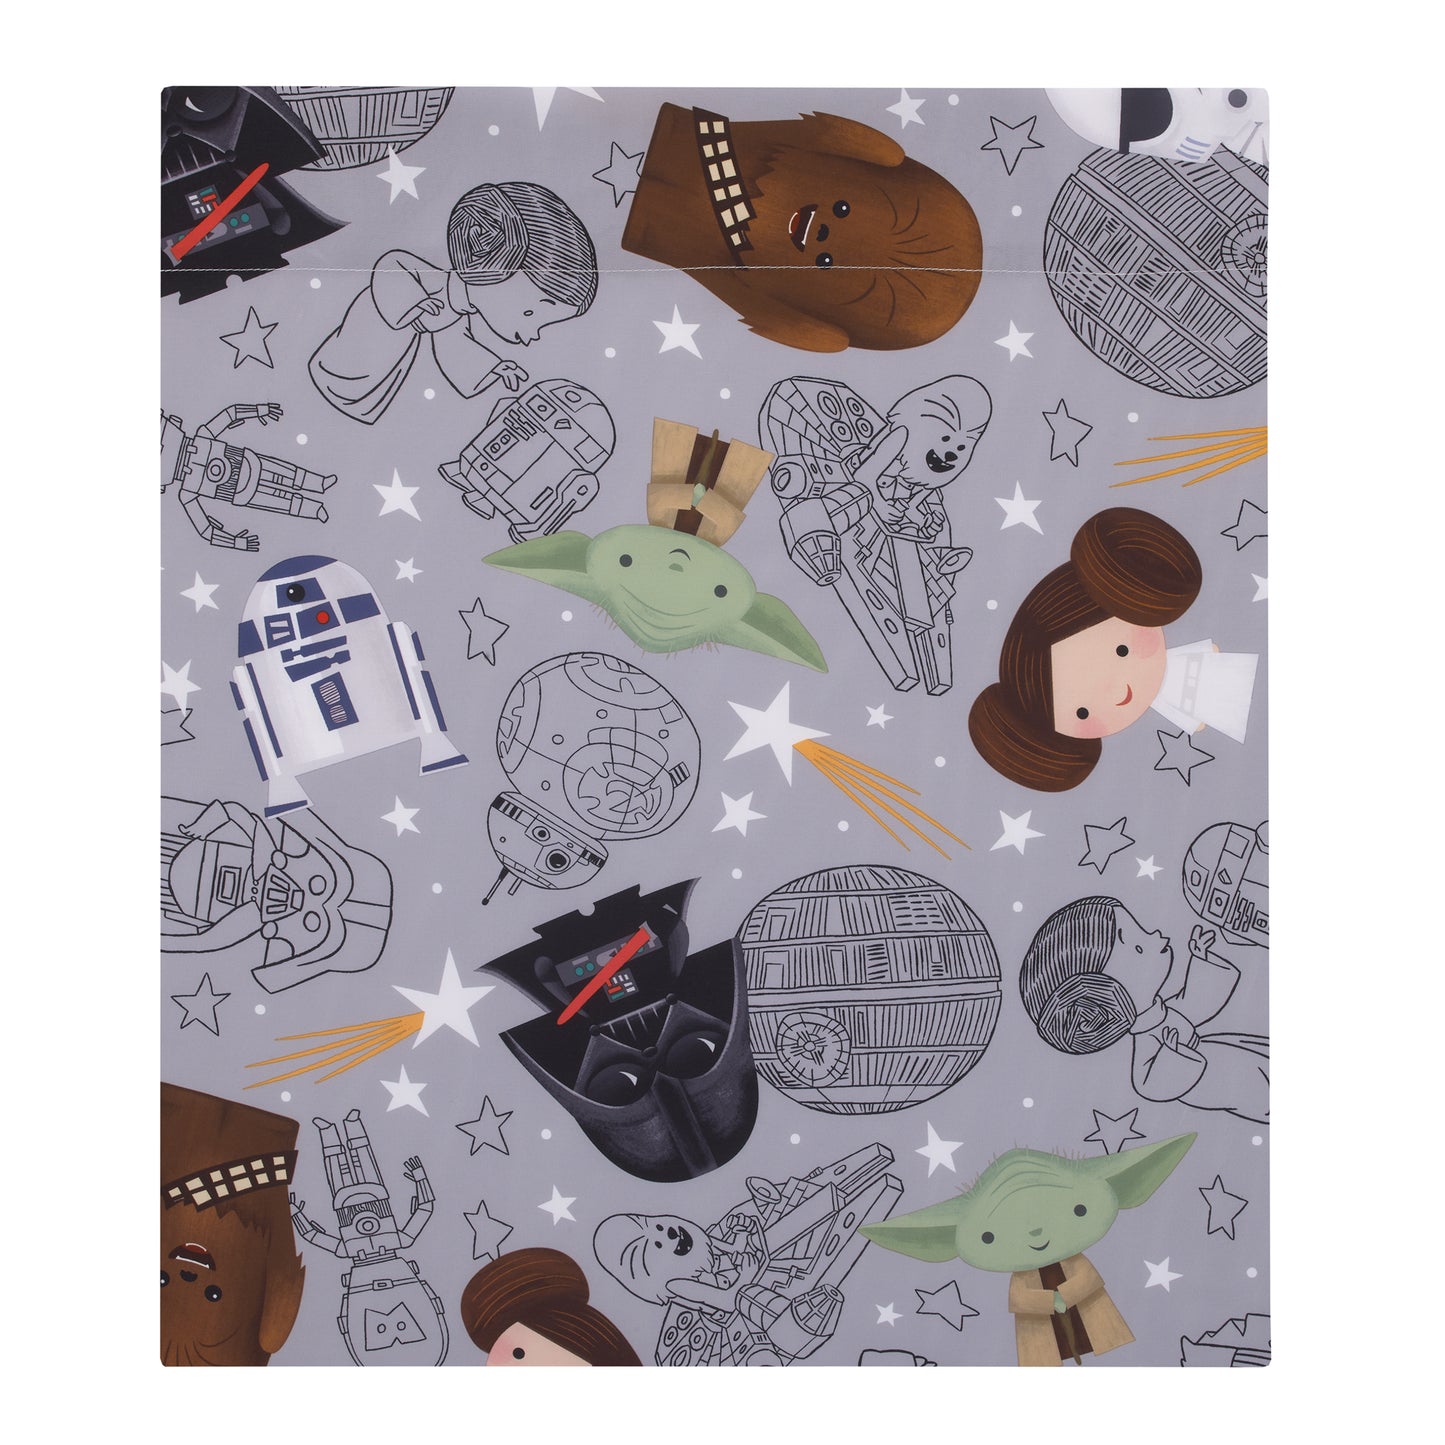 Star Wars Welcome to the Galaxy Navy and Gray Yoda, R2-D2, Chewbacca, and Princess Leia 4 Piece Toddler Bed Set - Comforter, Fitted Bottom Sheet, Flat Top Sheet, and Reversible Pillowcase